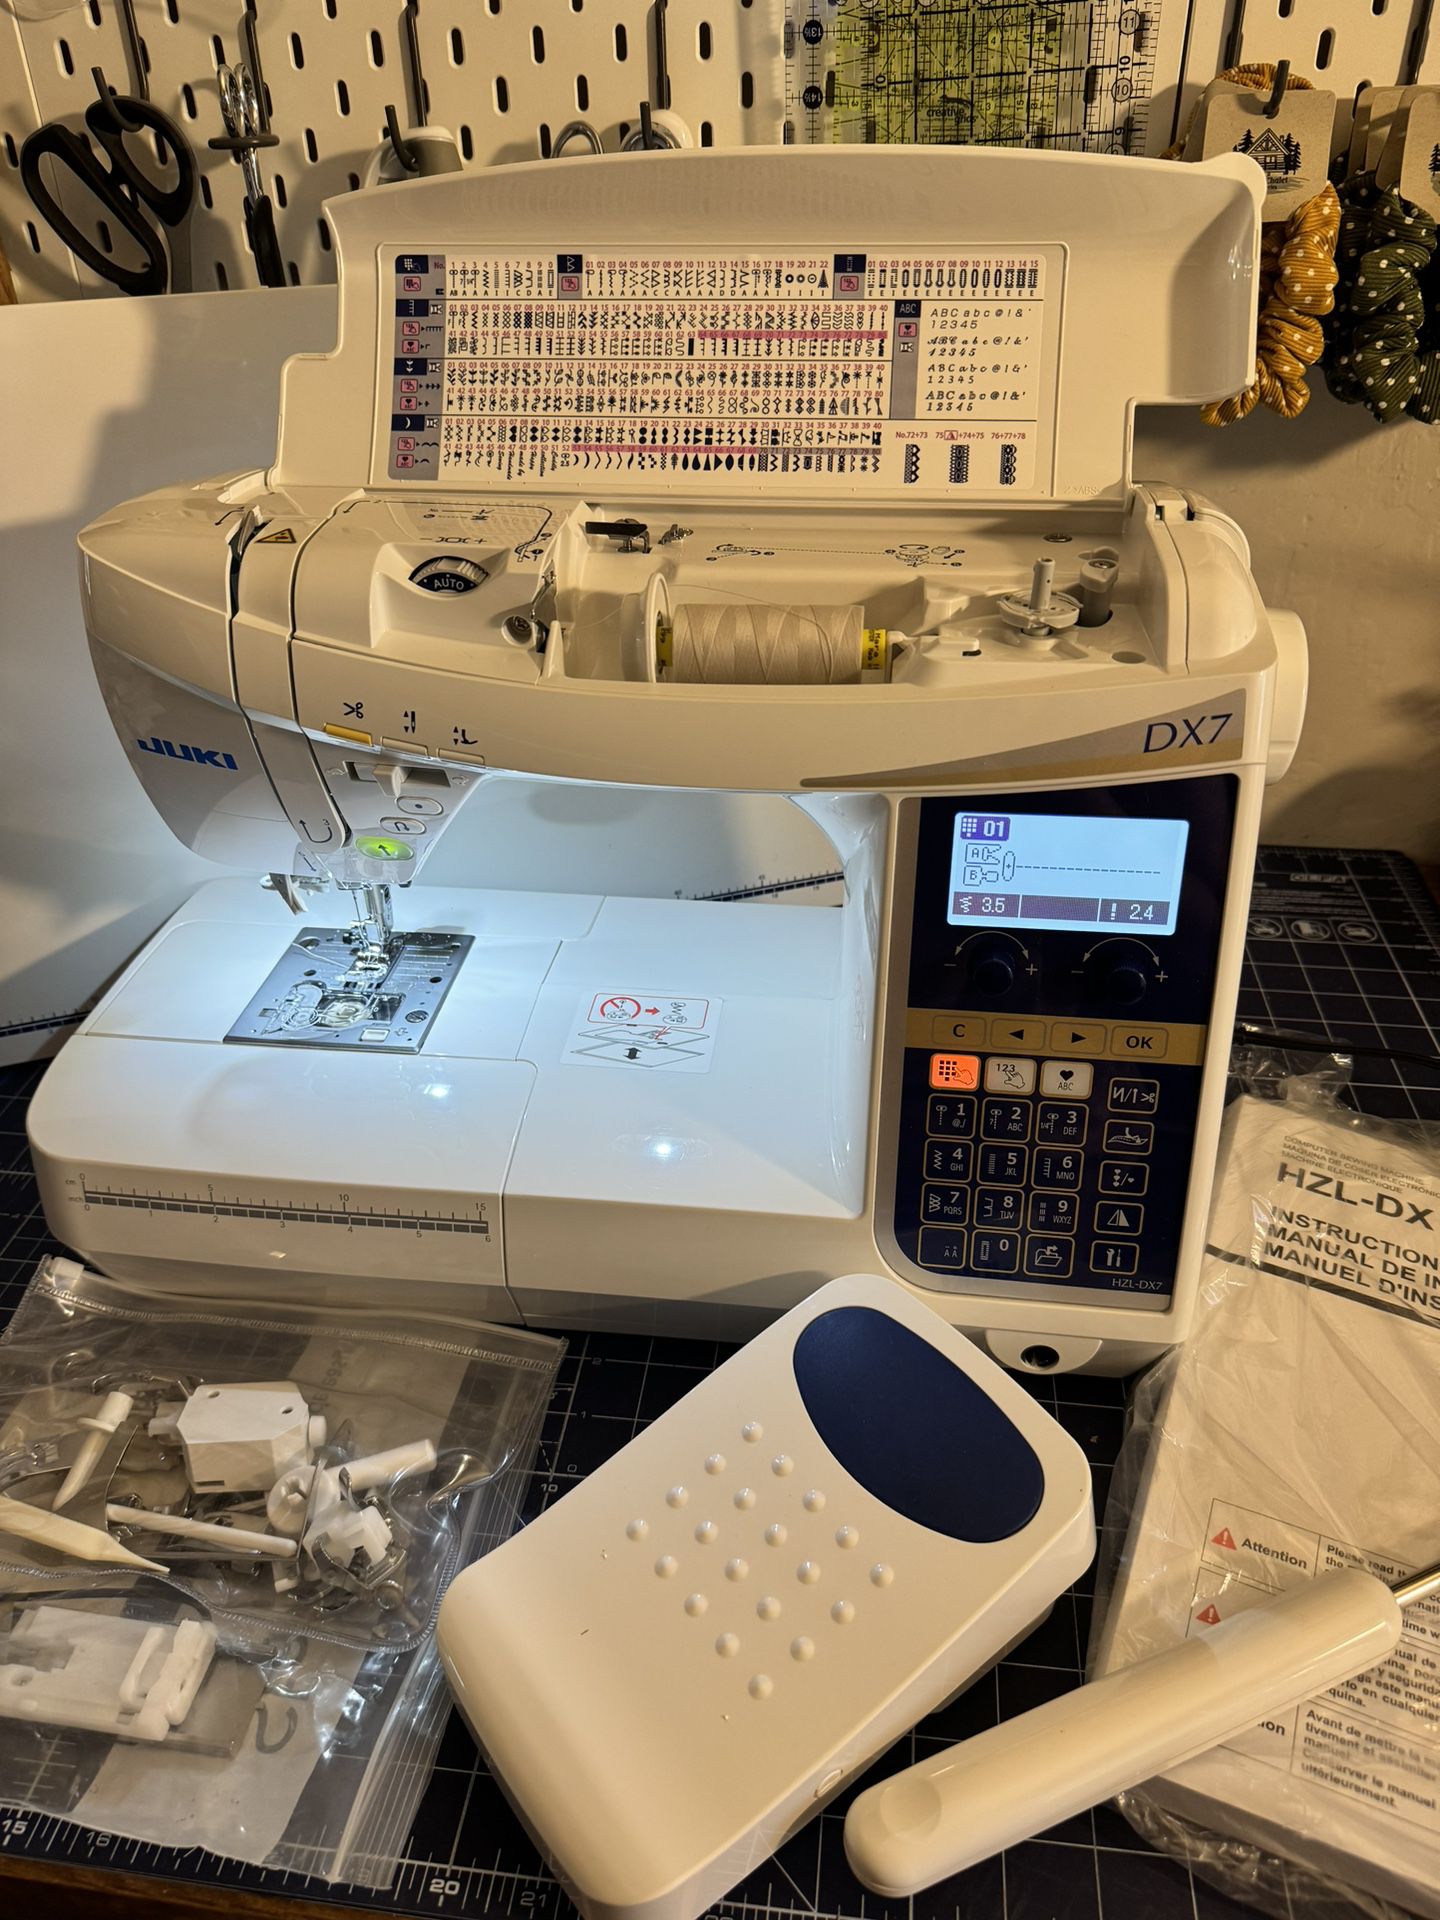 Juki HZL-DX7 Sewing Machine - Barely Used!